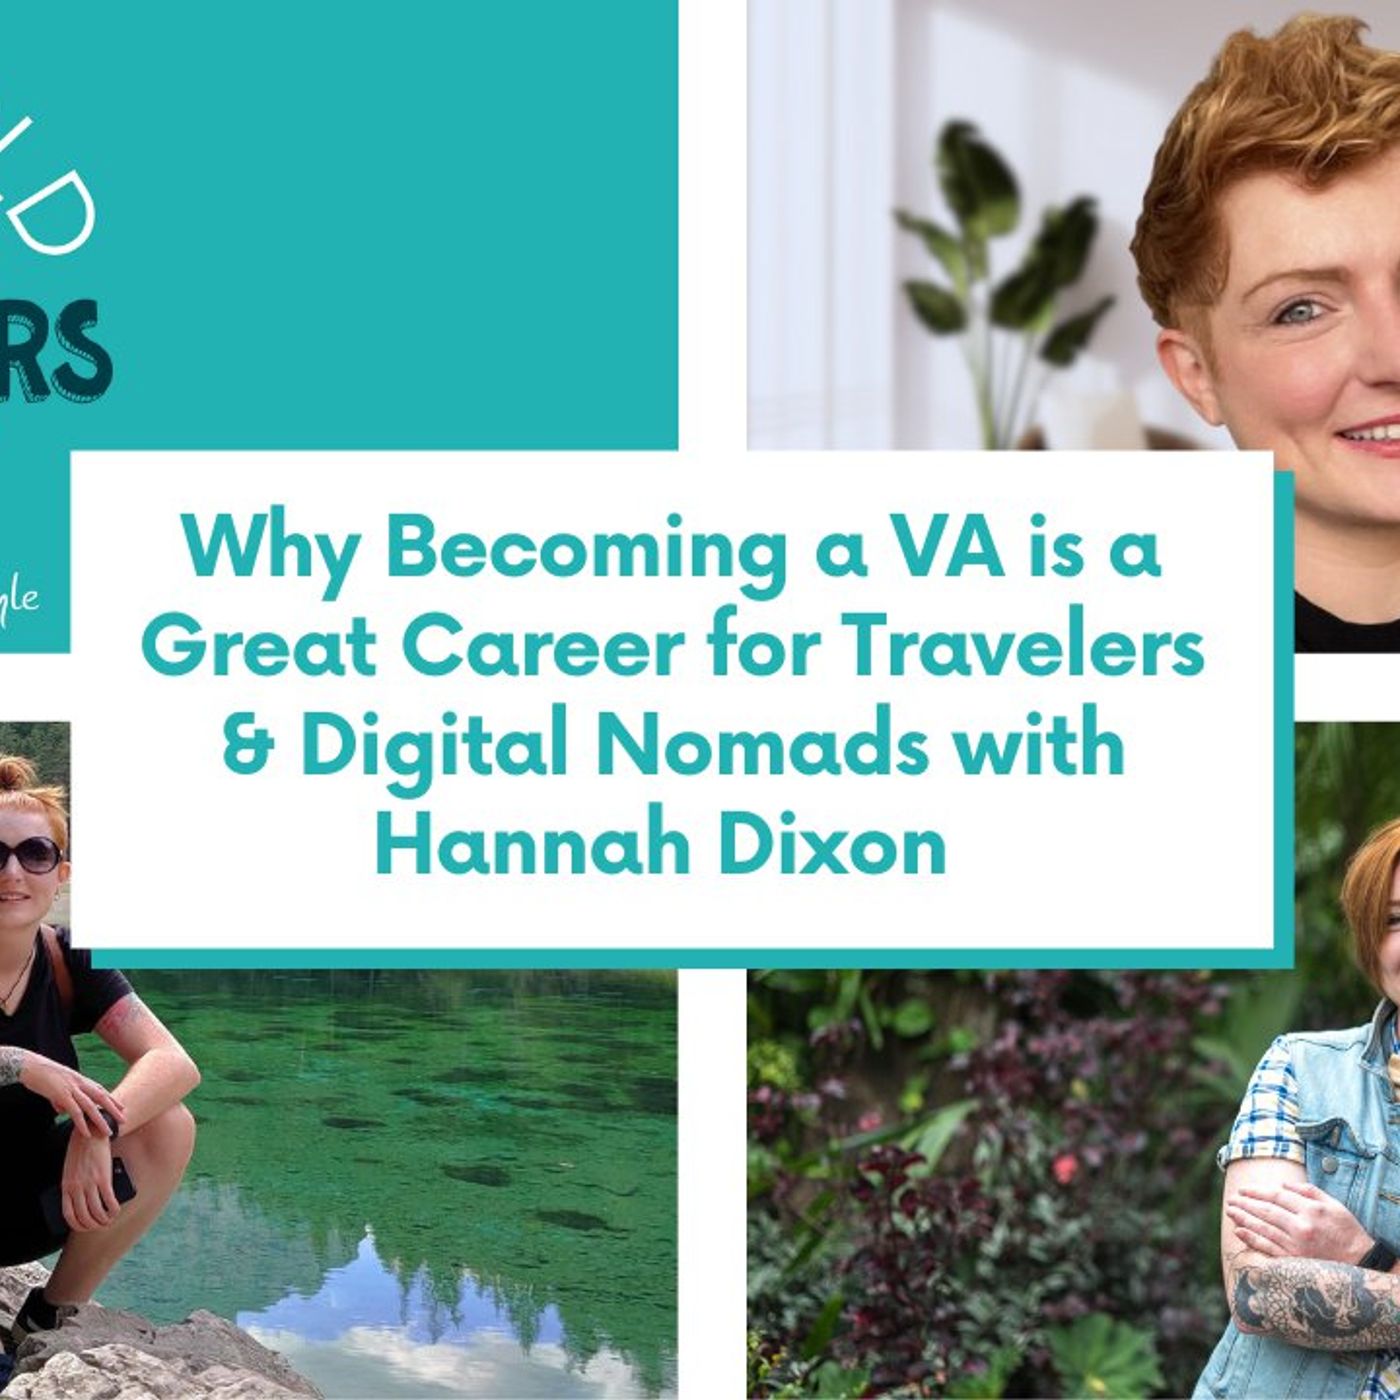 Why Becoming a VA is a Great Career for Travelers & Digital Nomads with Hannah Dixon